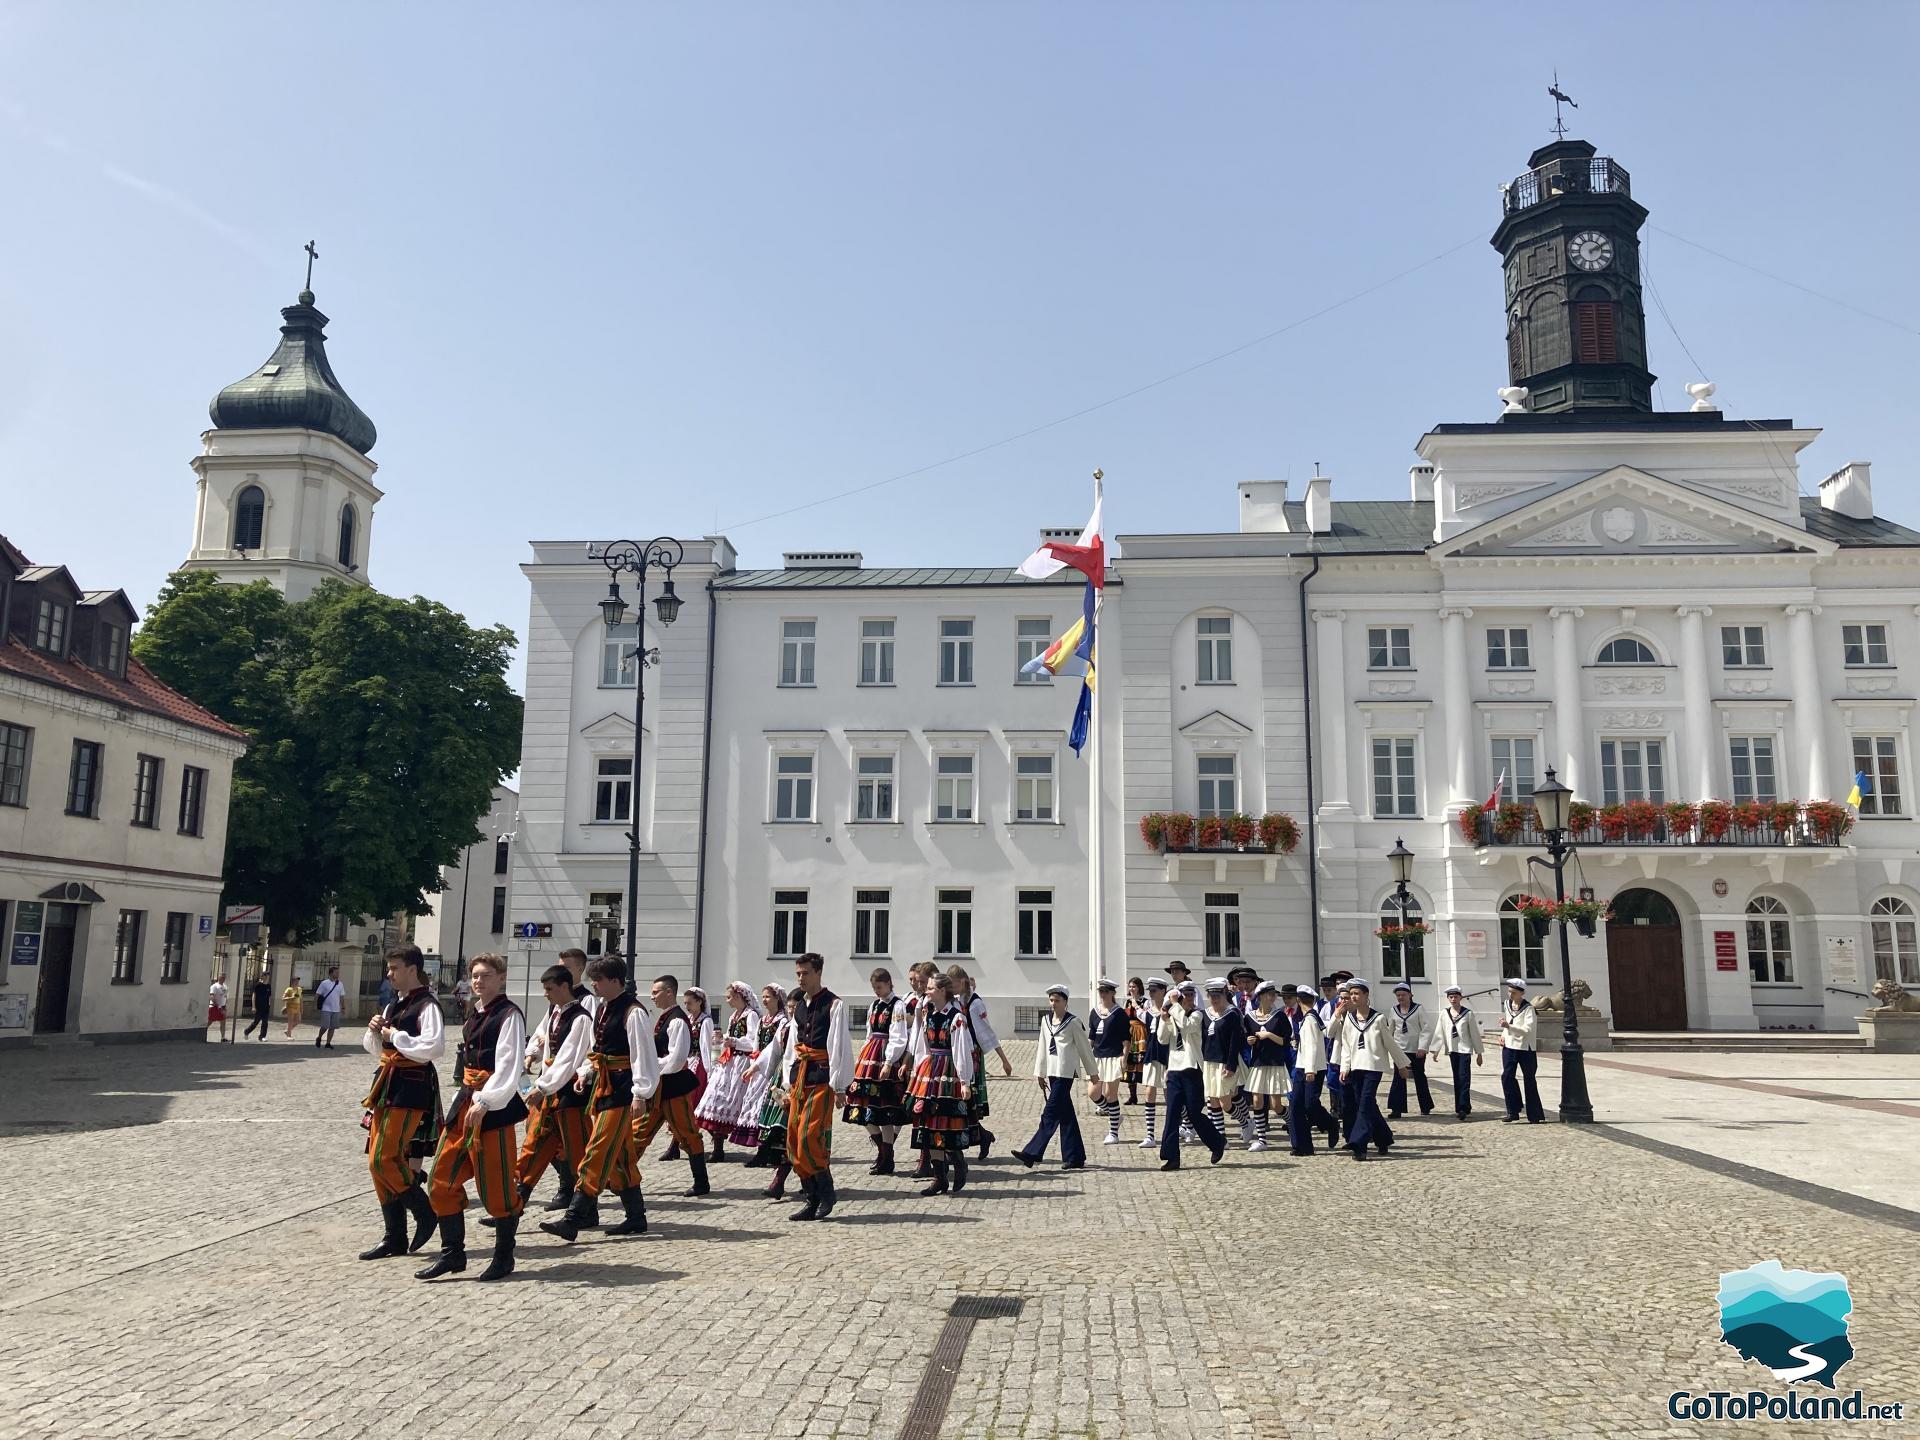 A folk band in front of a white building, girls and boys have nice folk costumes